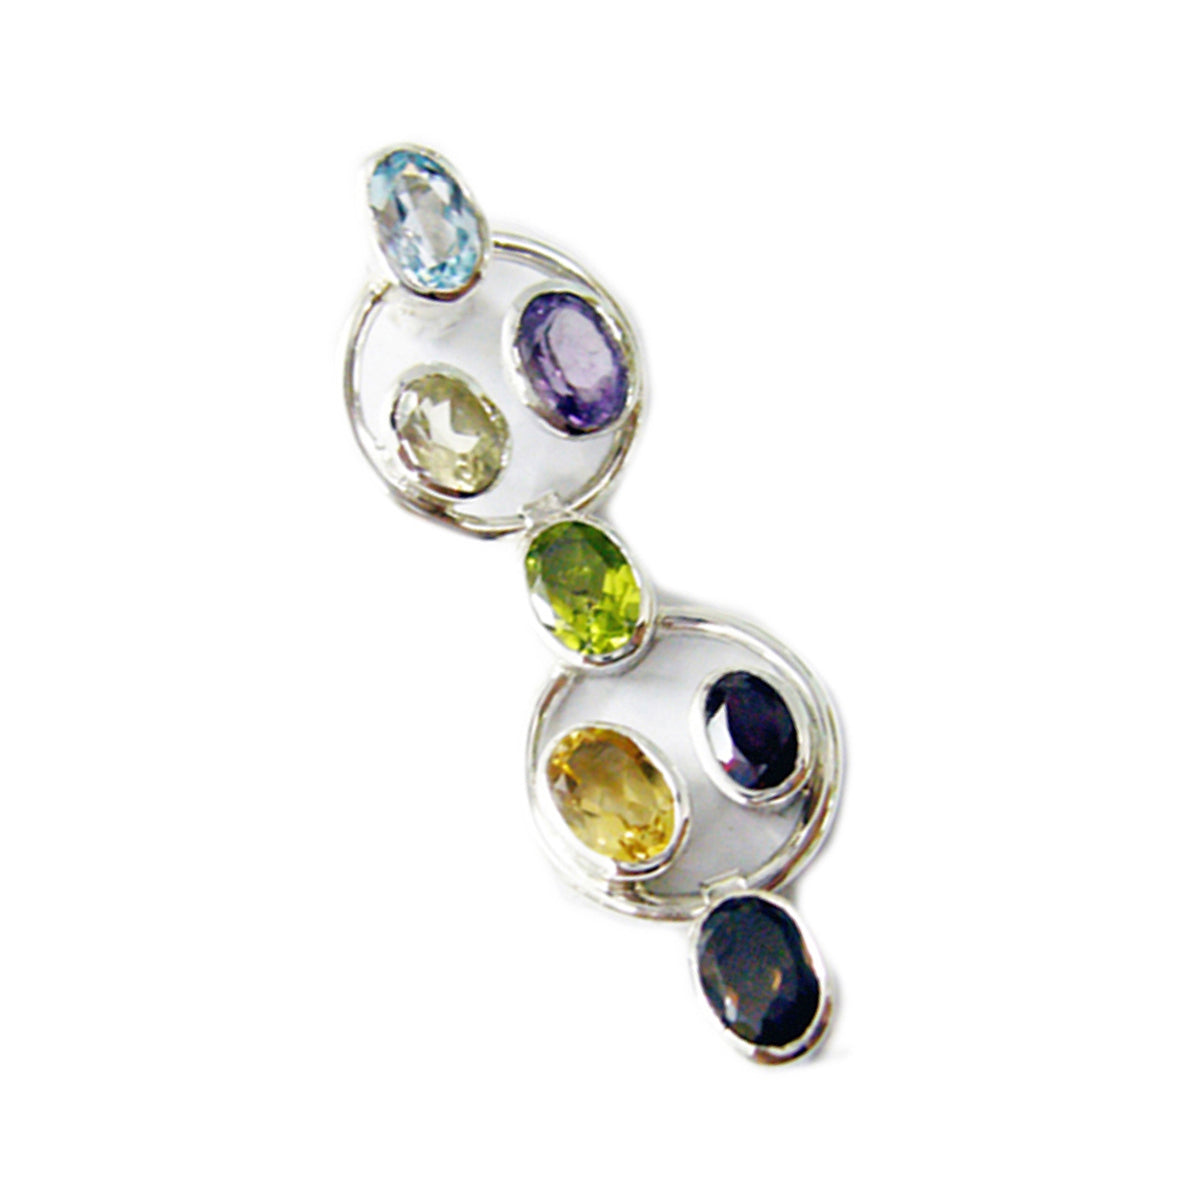 Riyo Real Gems Oval Faceted Multi Color Multi Stone Solid Silver Pendant Gift For Wedding